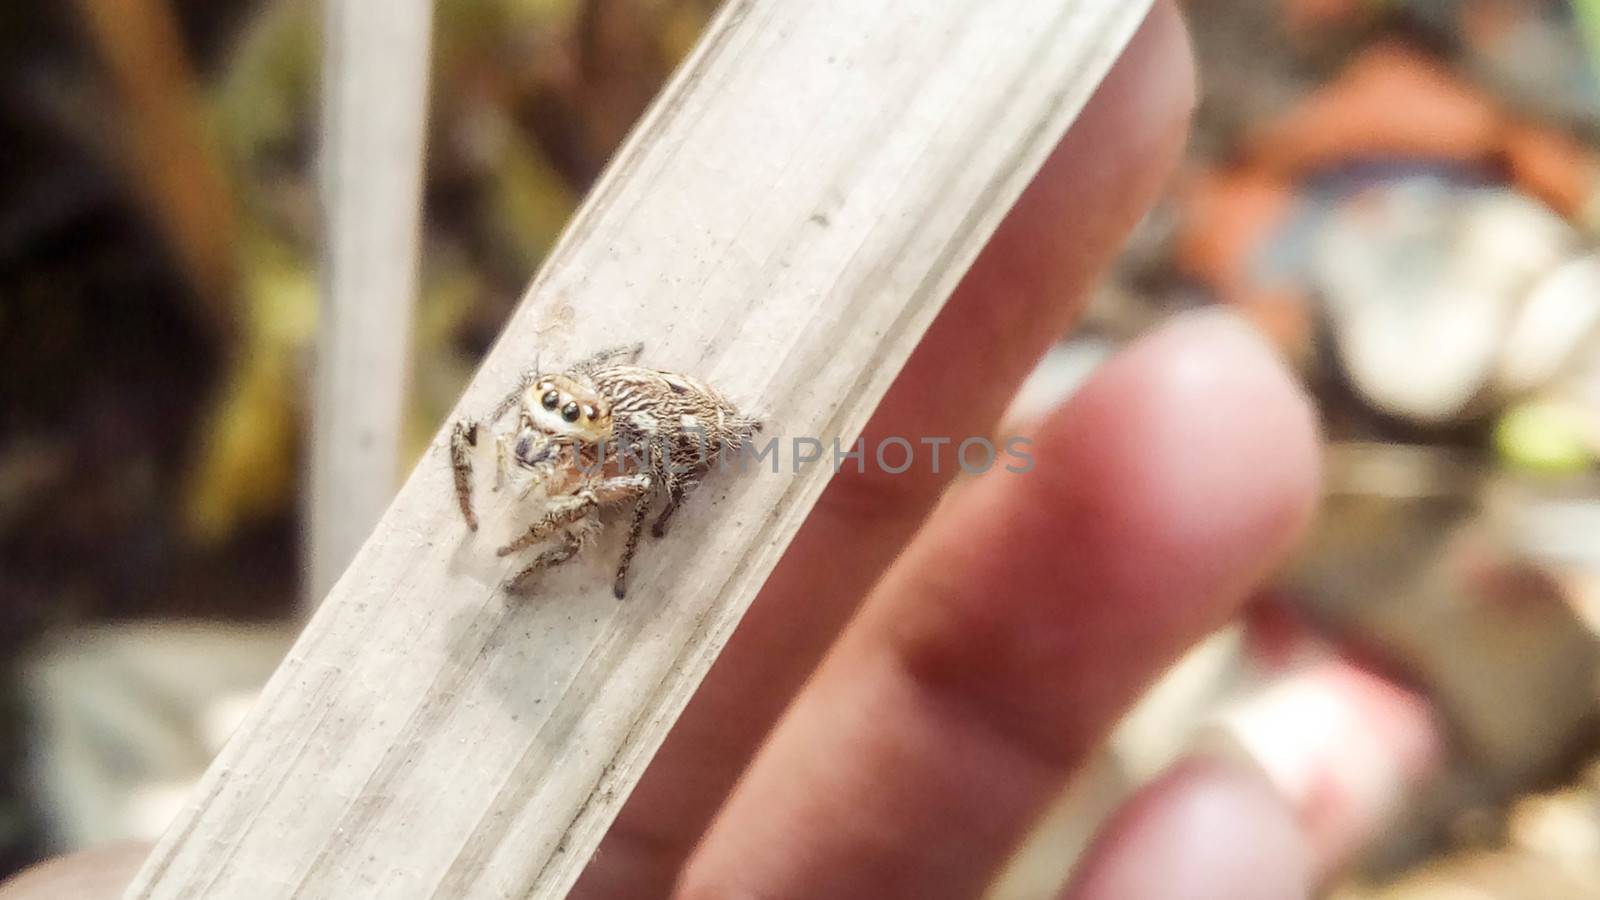 looking beautiful spider on hand